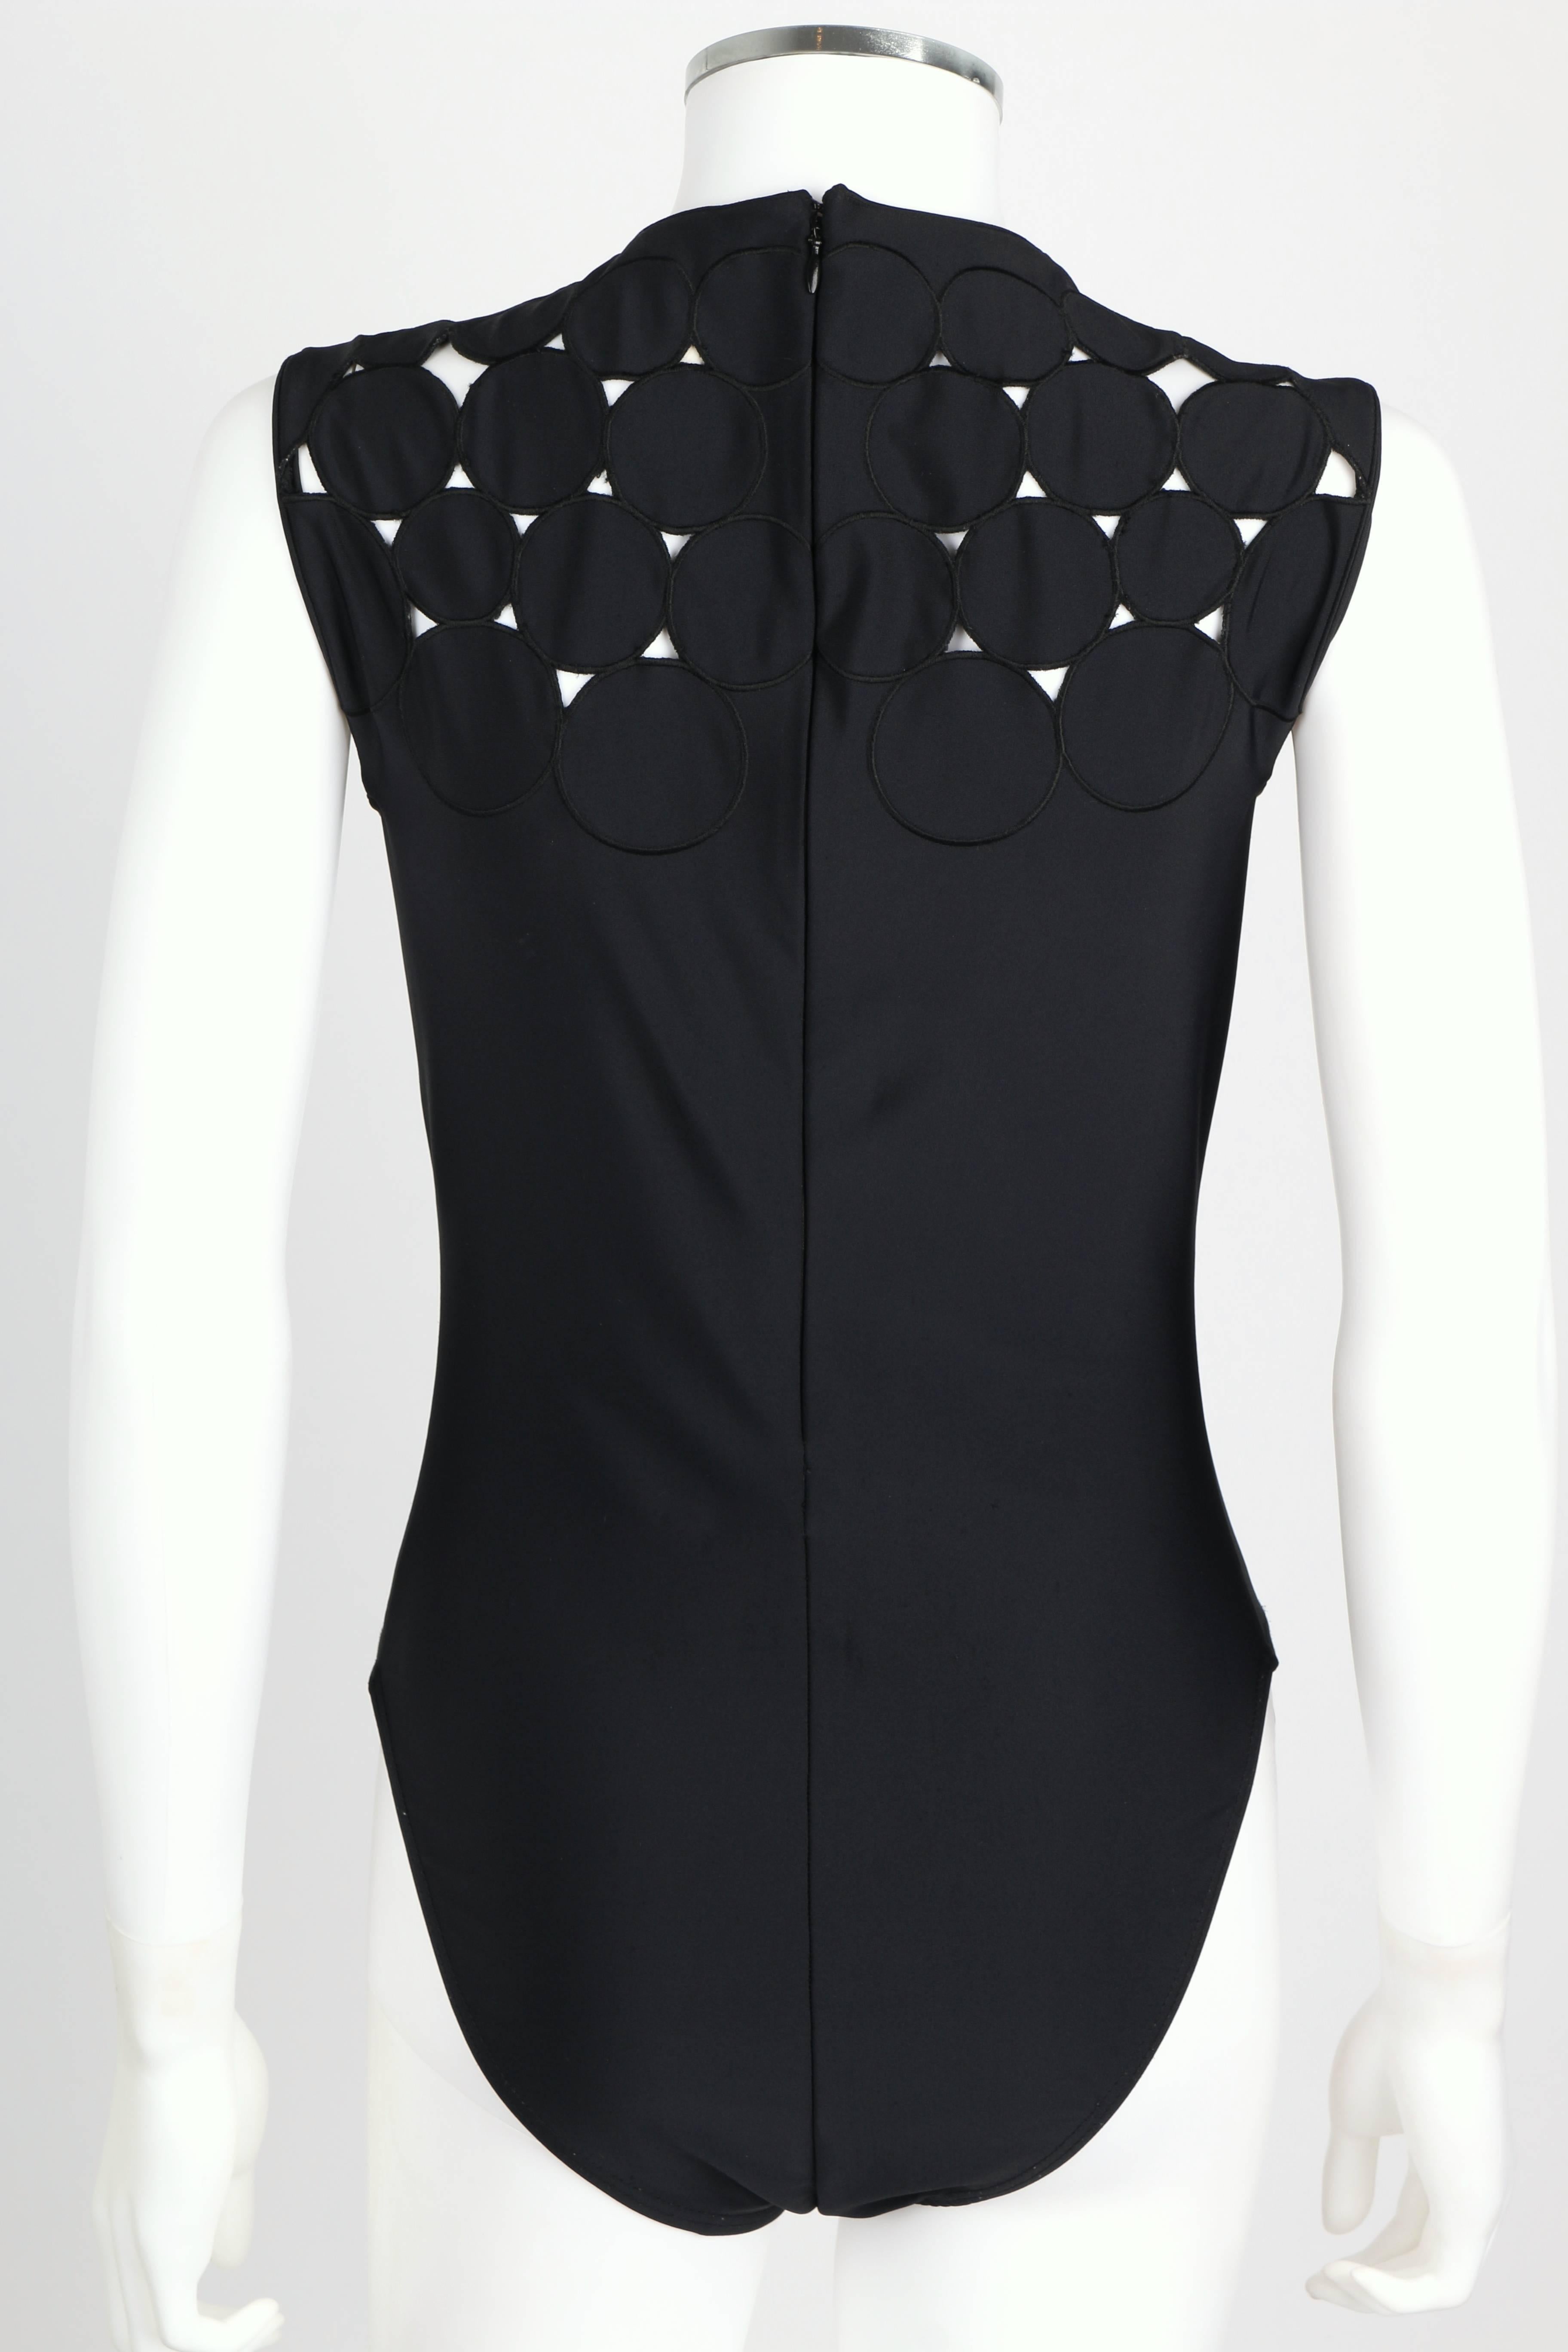 Women's GIANNI VERSACE COUTURE S/S 1994 Black Sleeveless Circle Cutout Bodysuit Top For Sale